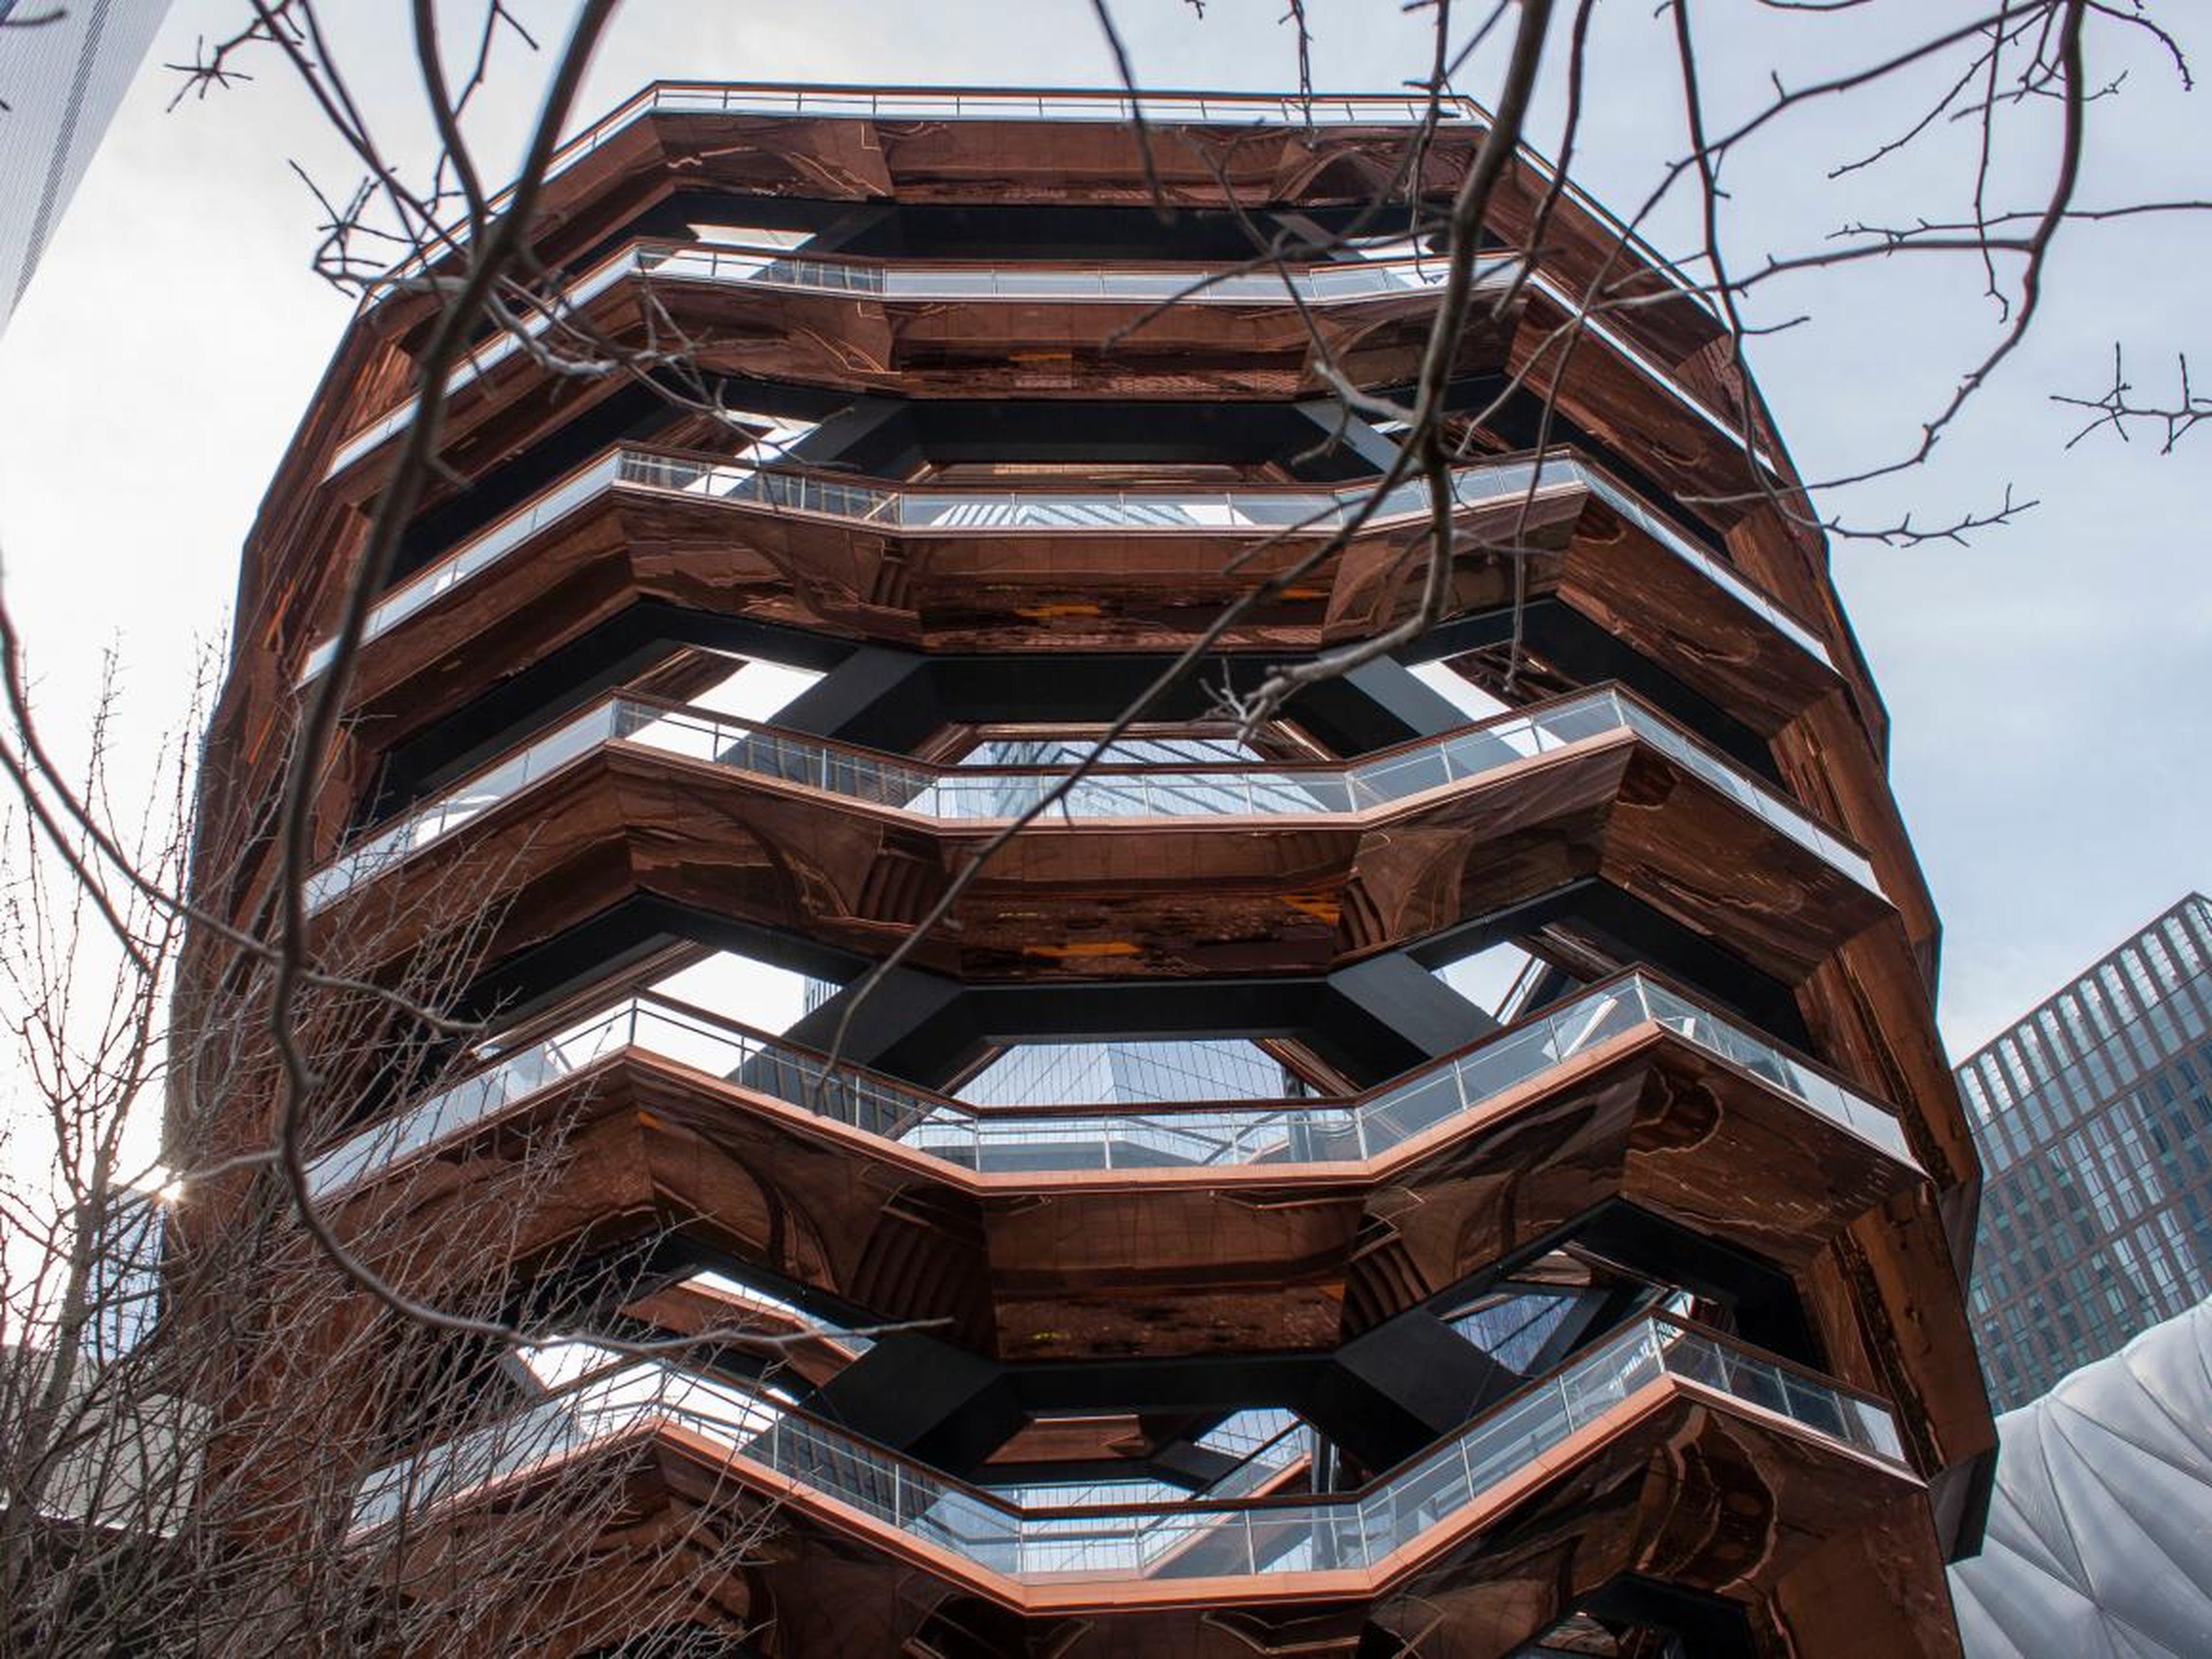 Vessel is a 150-foot tall climbable sculpture that cost $200 million to build.